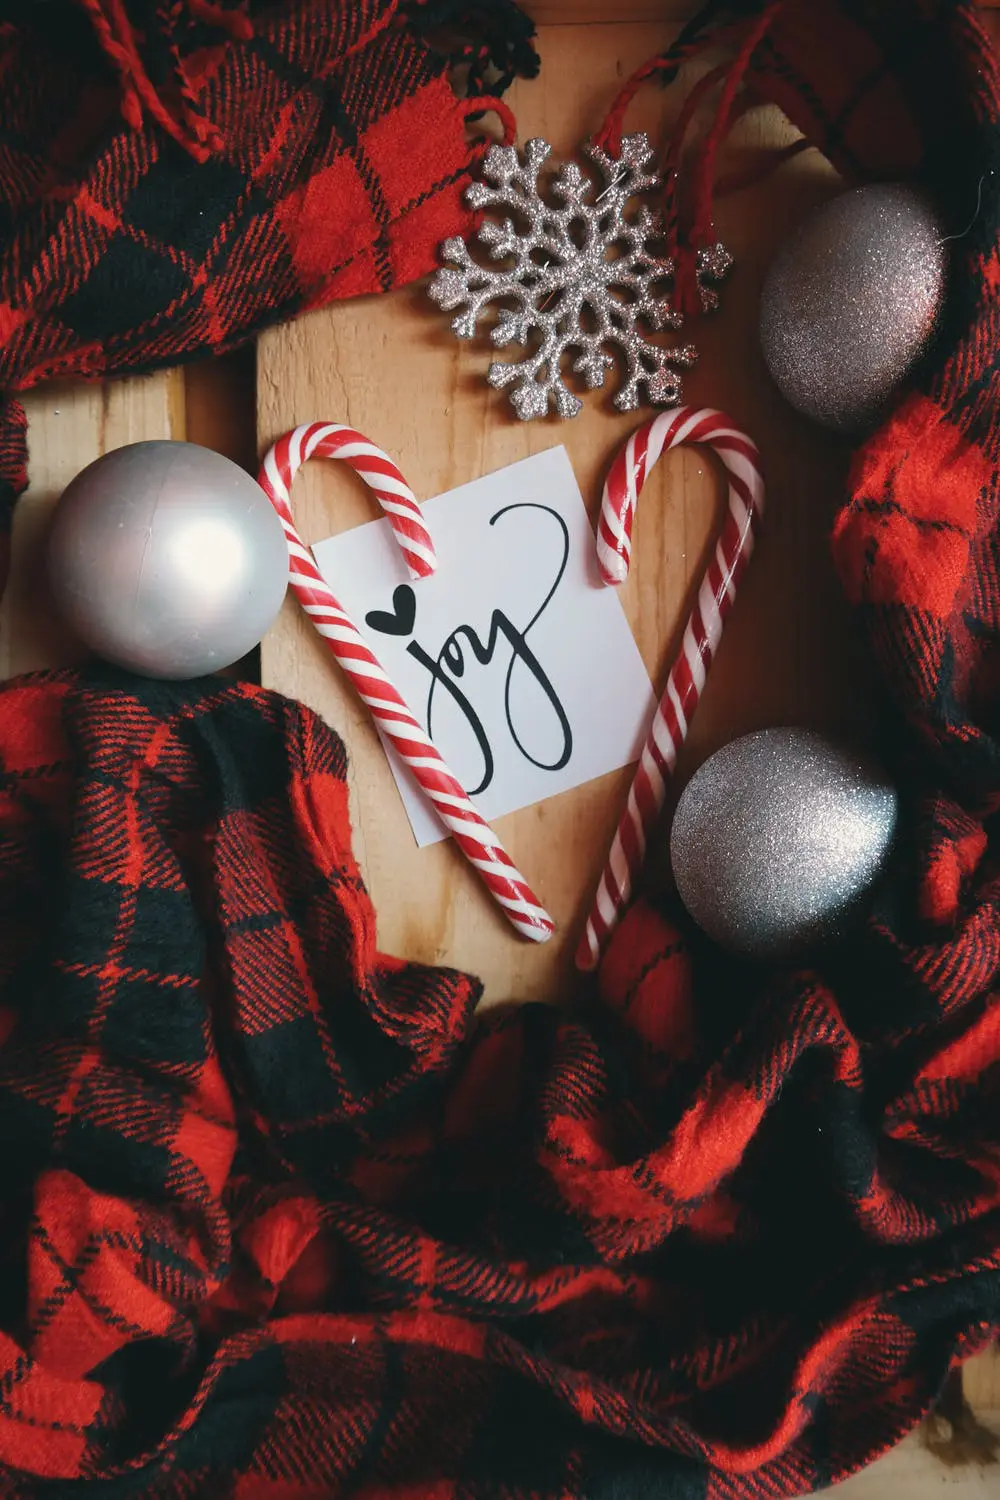 A red and black plaid blanket with candy canes, a snowflake, and a note that says 